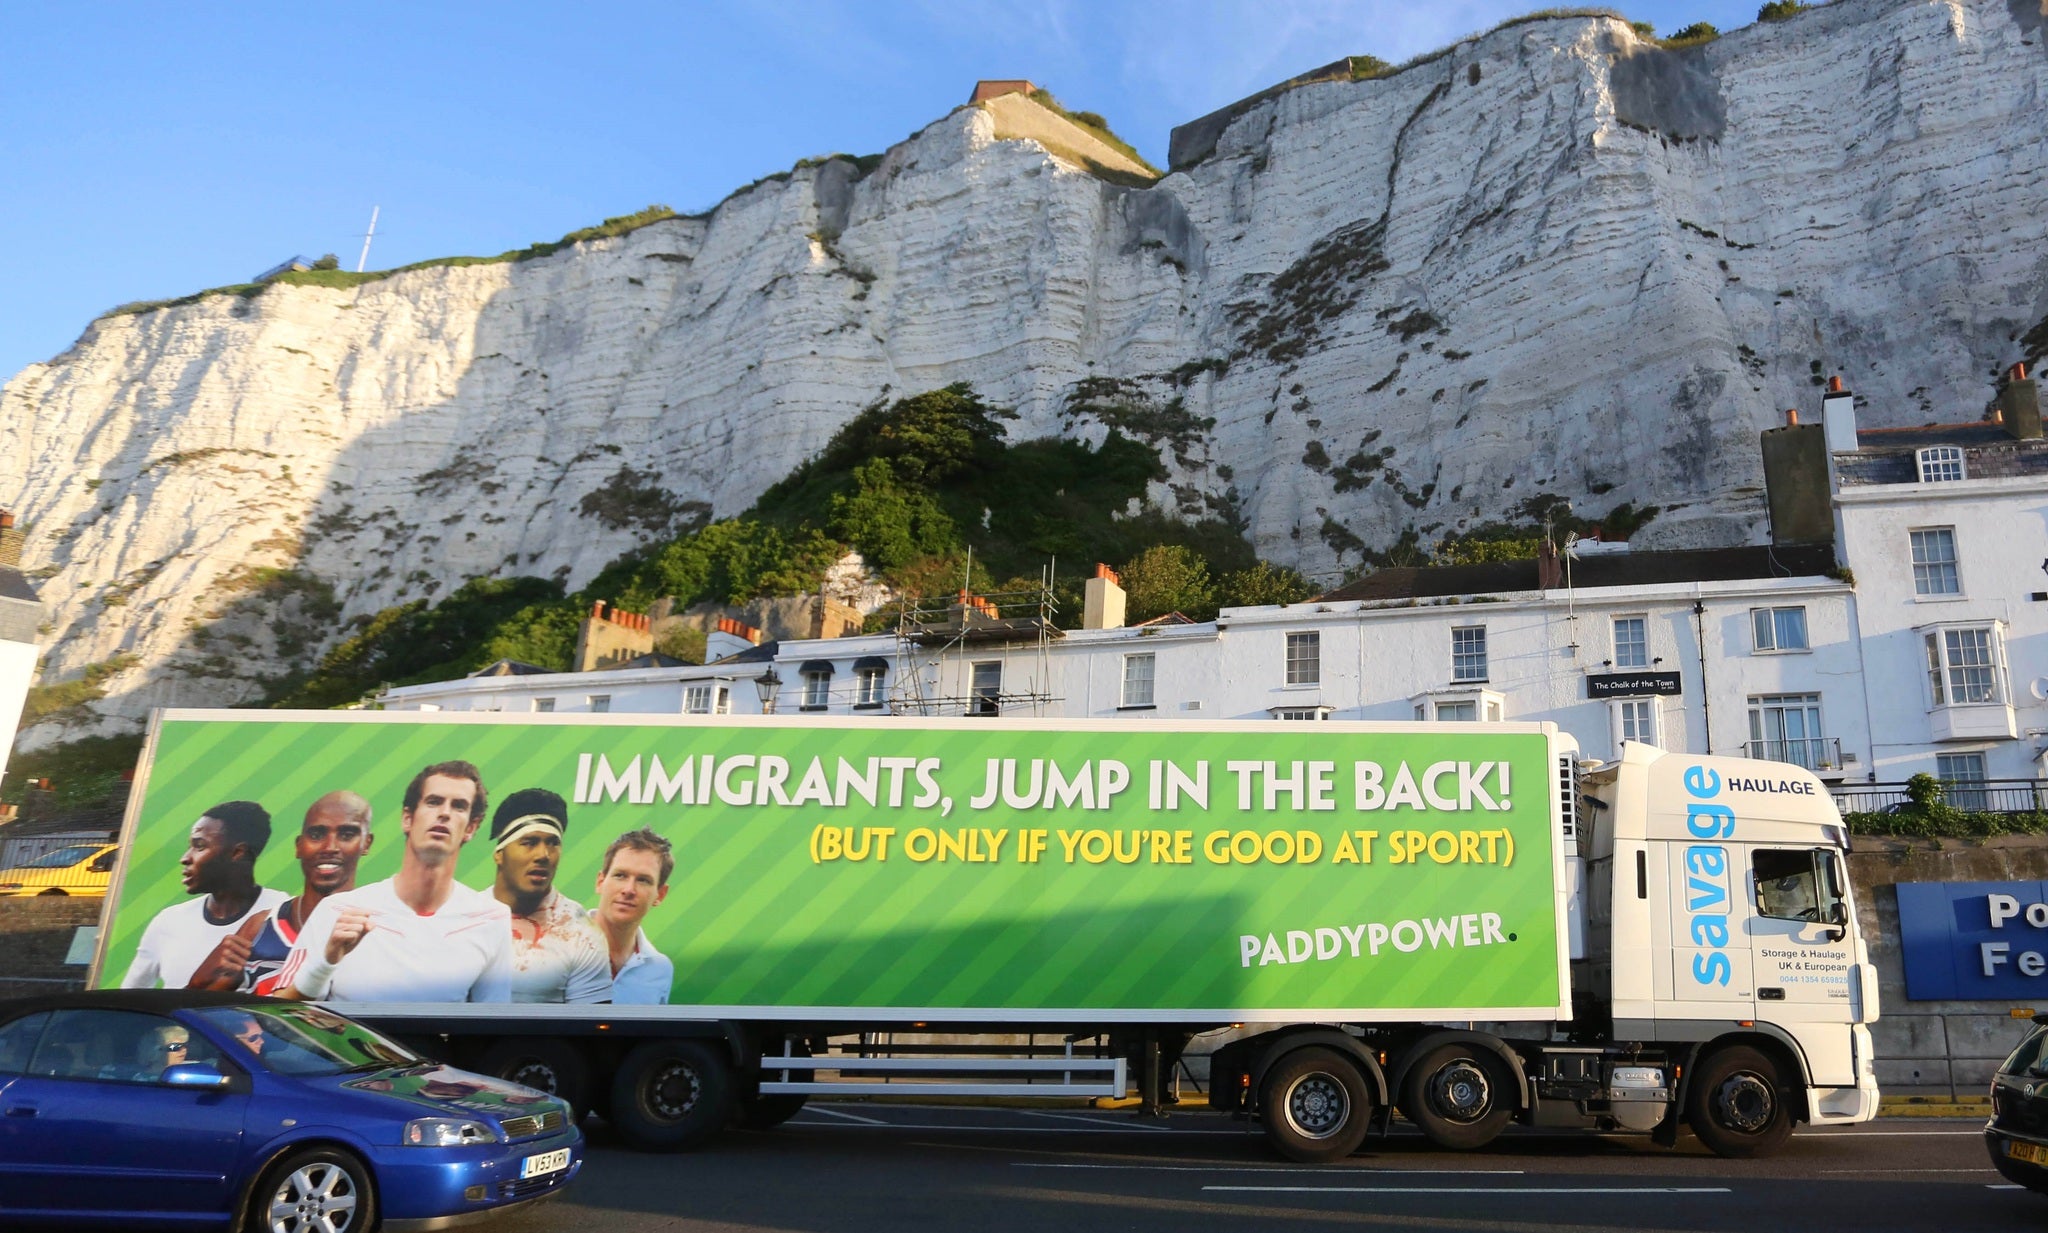 Paddy Power shows off its latest publicity stunt in front of the cliffs of Dover